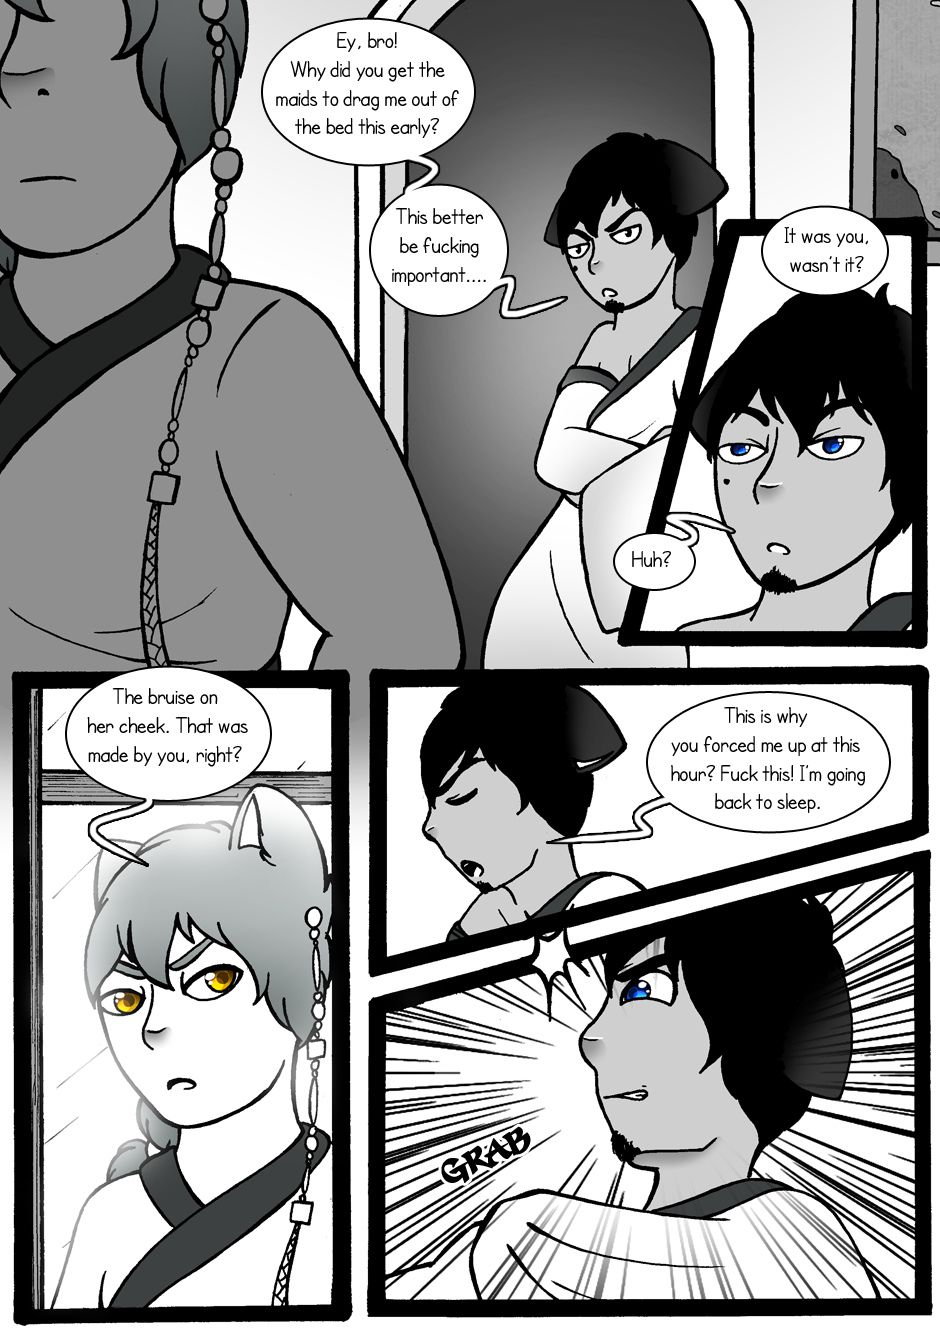 [Jeny-jen94] Between Kings and Queens [Ongoing] 106